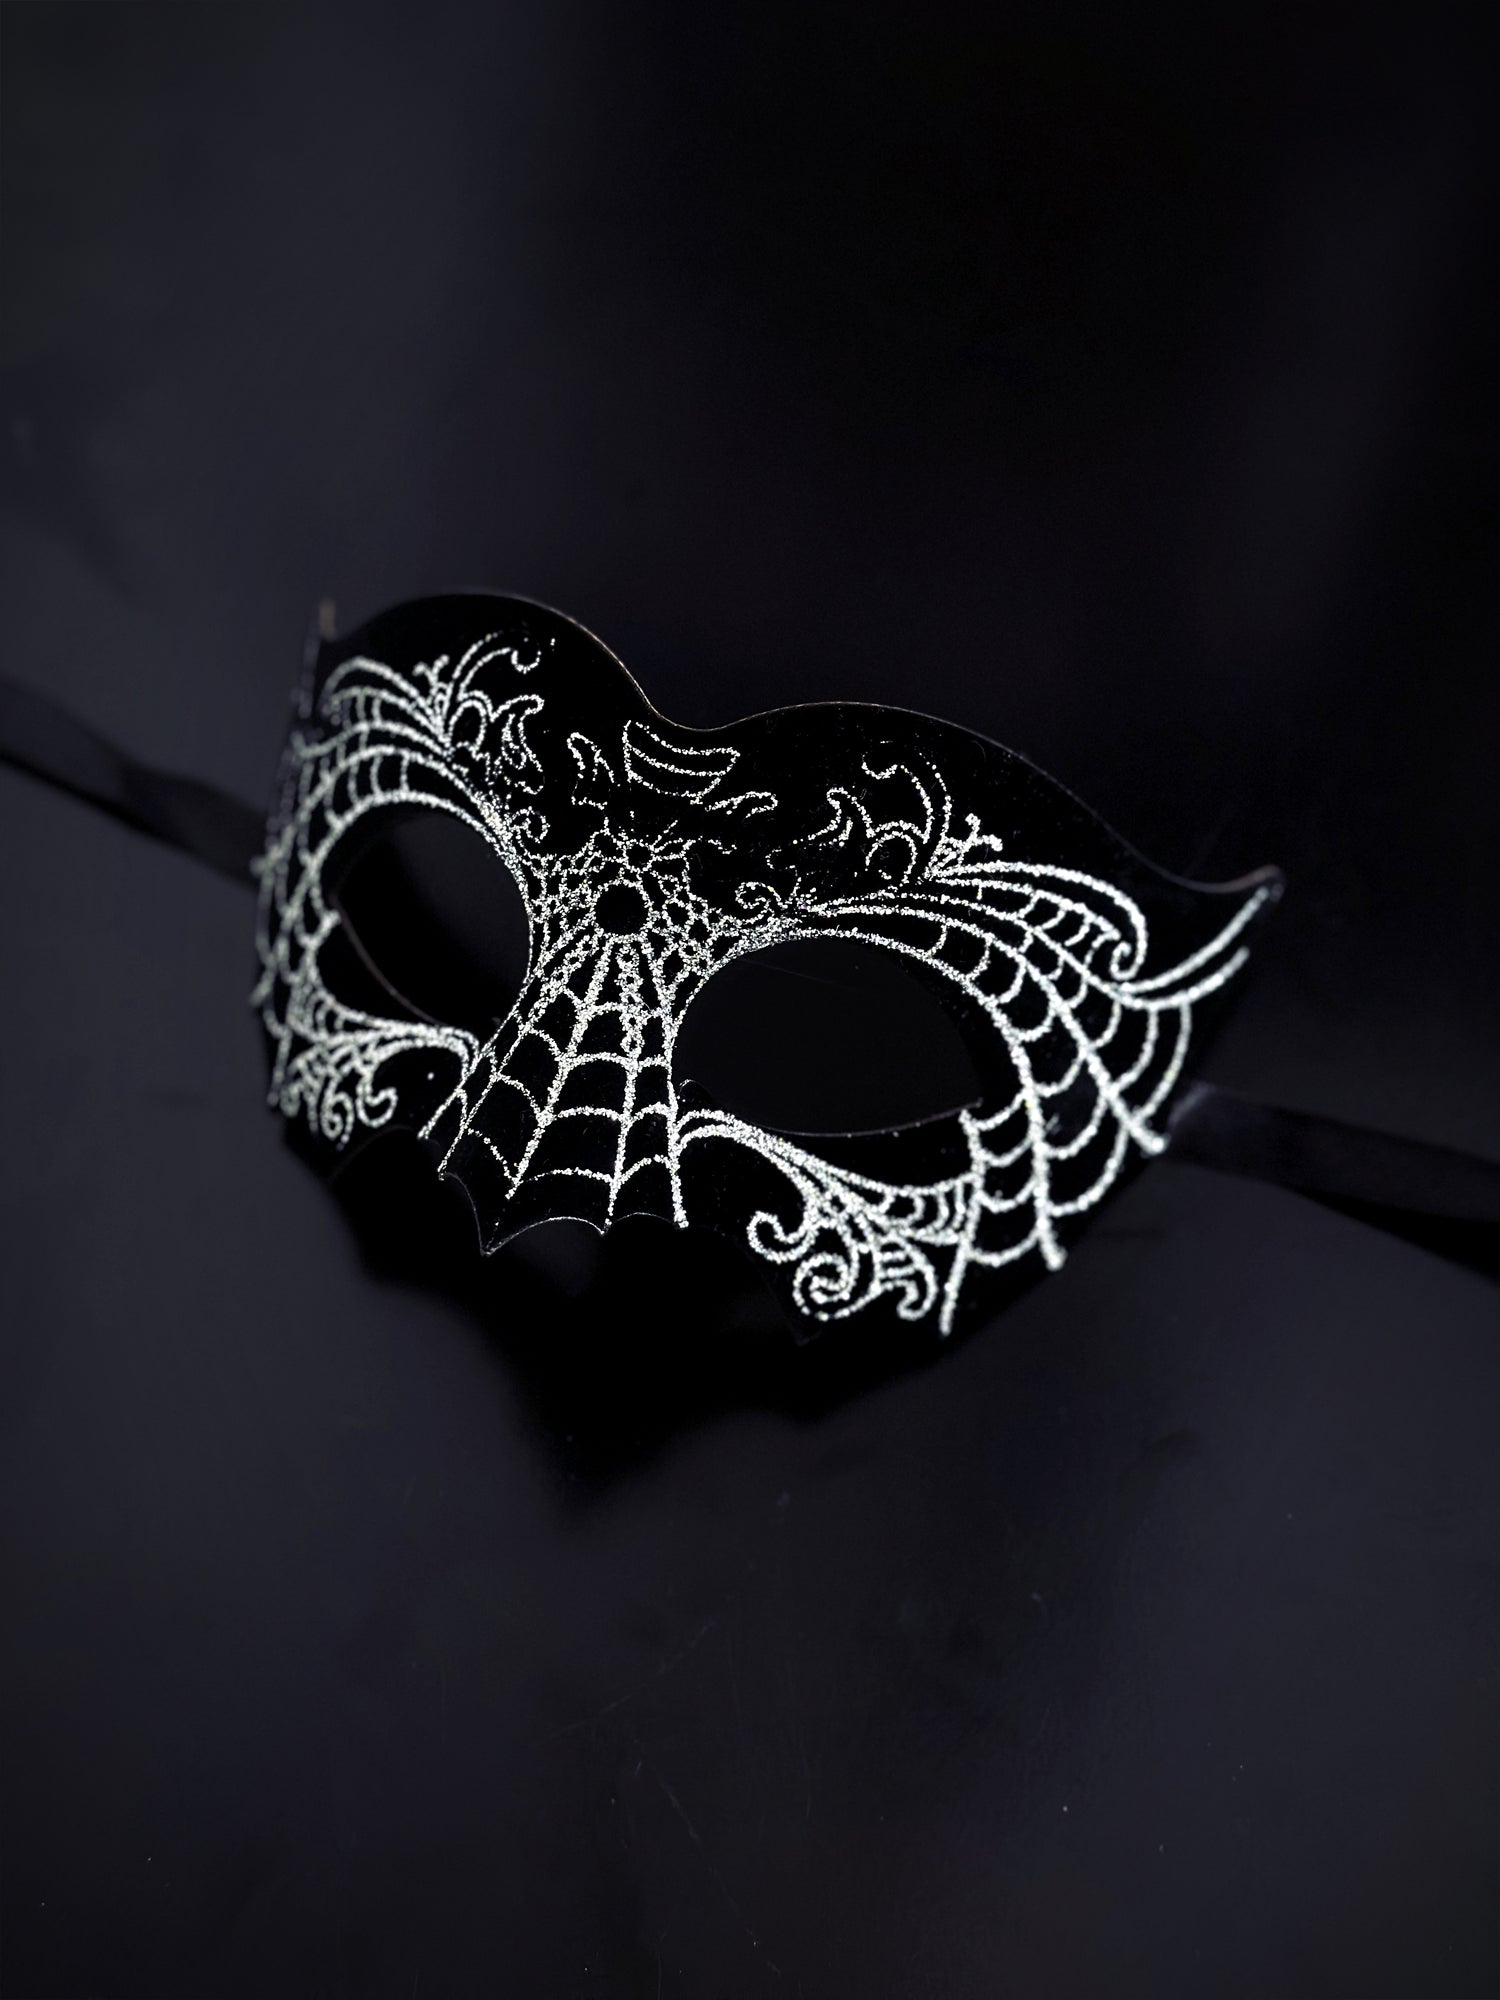 Unisex masquerade mask in black with a silver design.